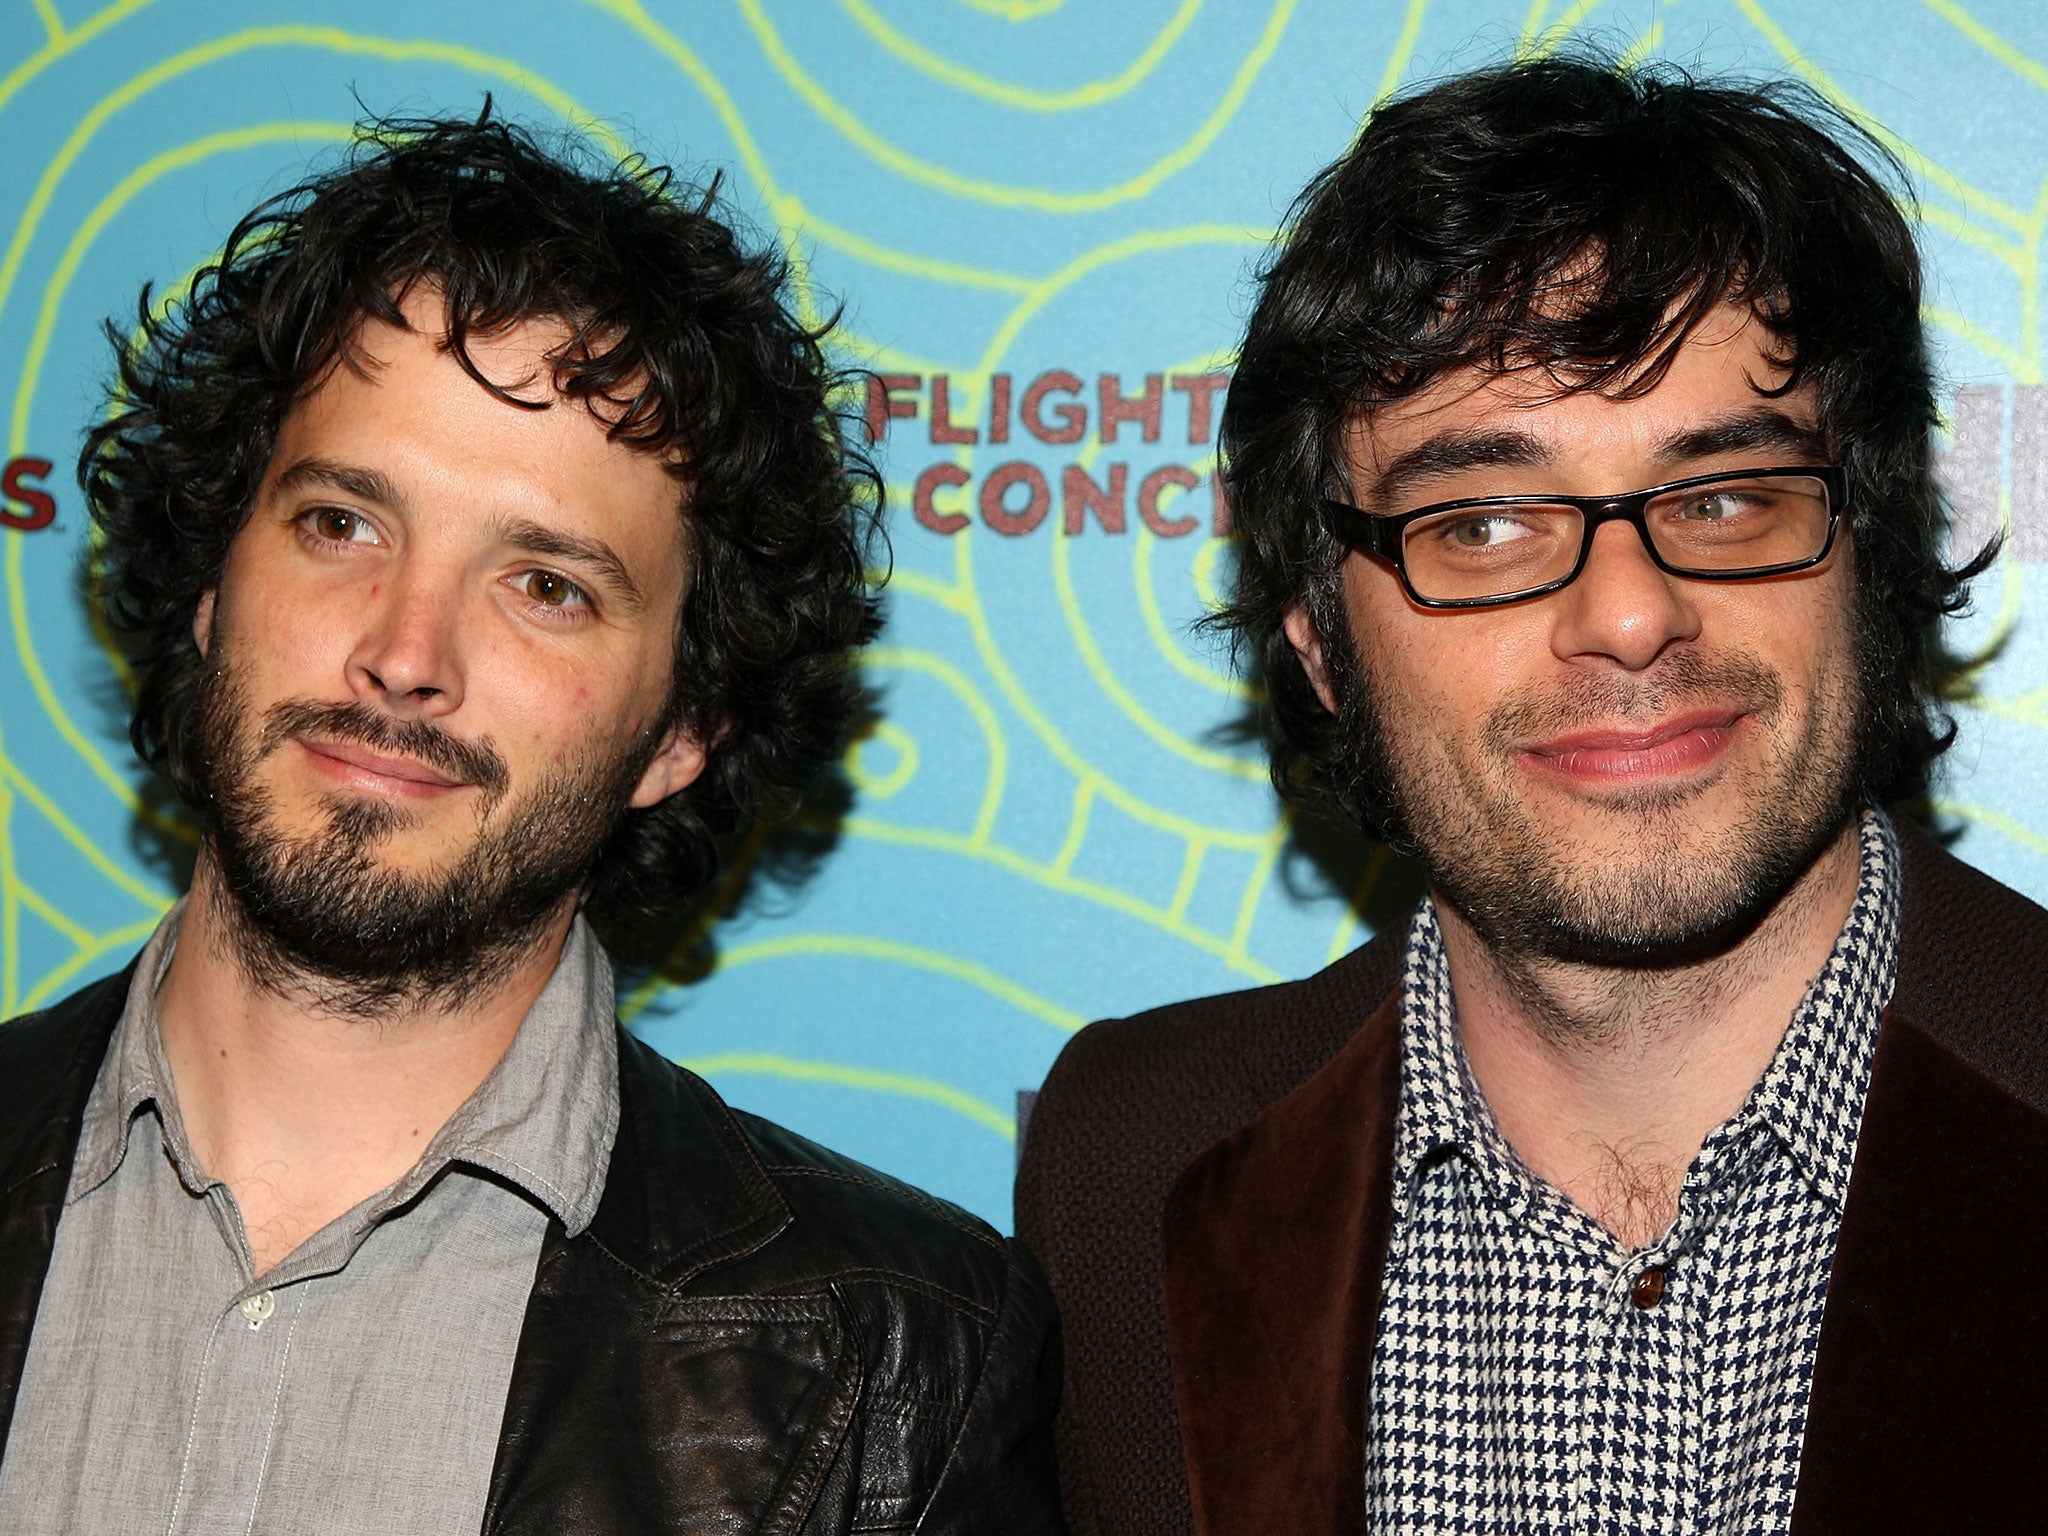 dlight of the conchords